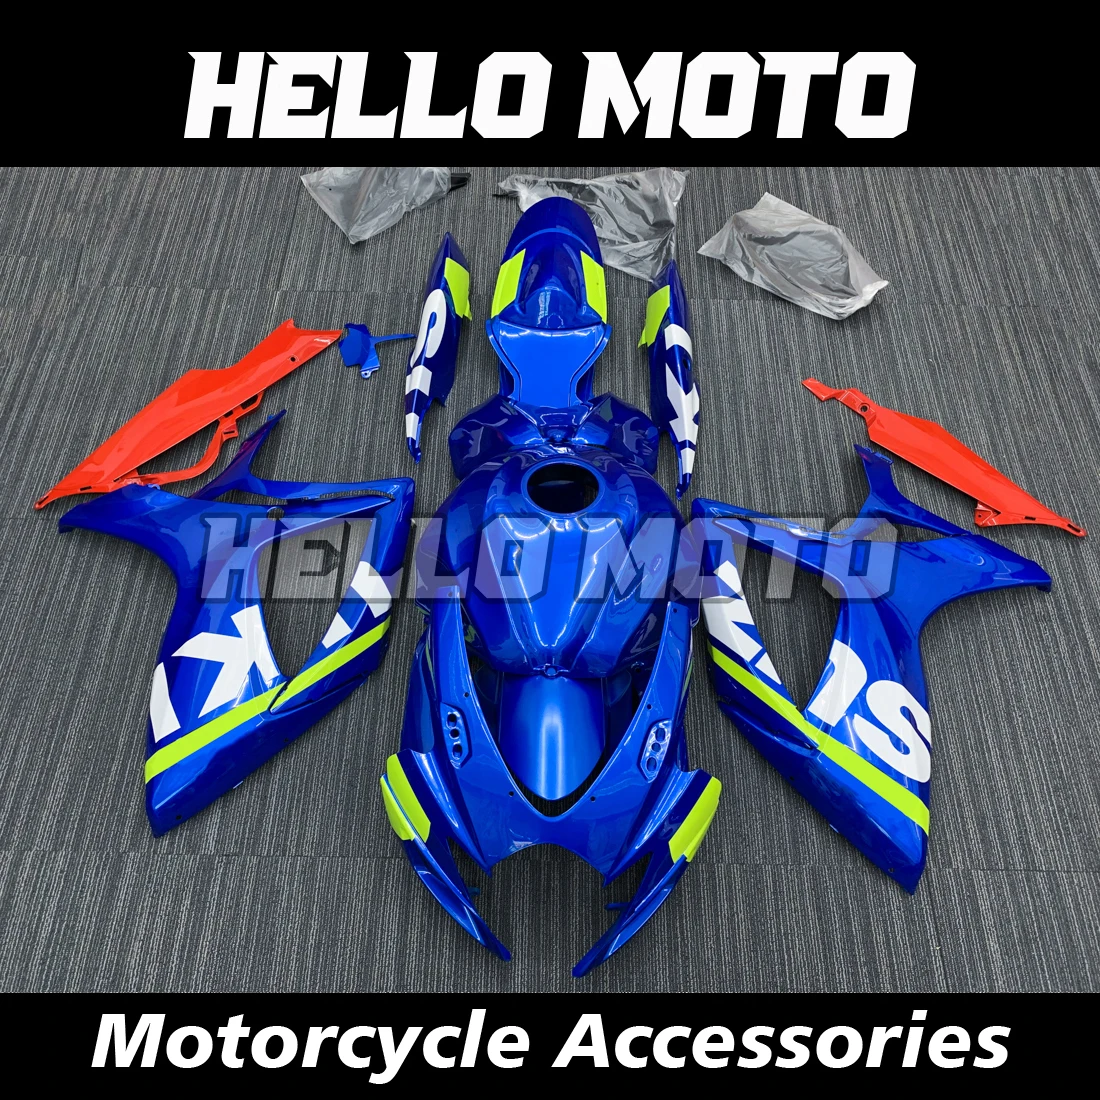 

New ABS Injection Molding Motorcycle Fairings Kits Fit For K6 K7 600/750cc 2006 2007 Bodywork Set